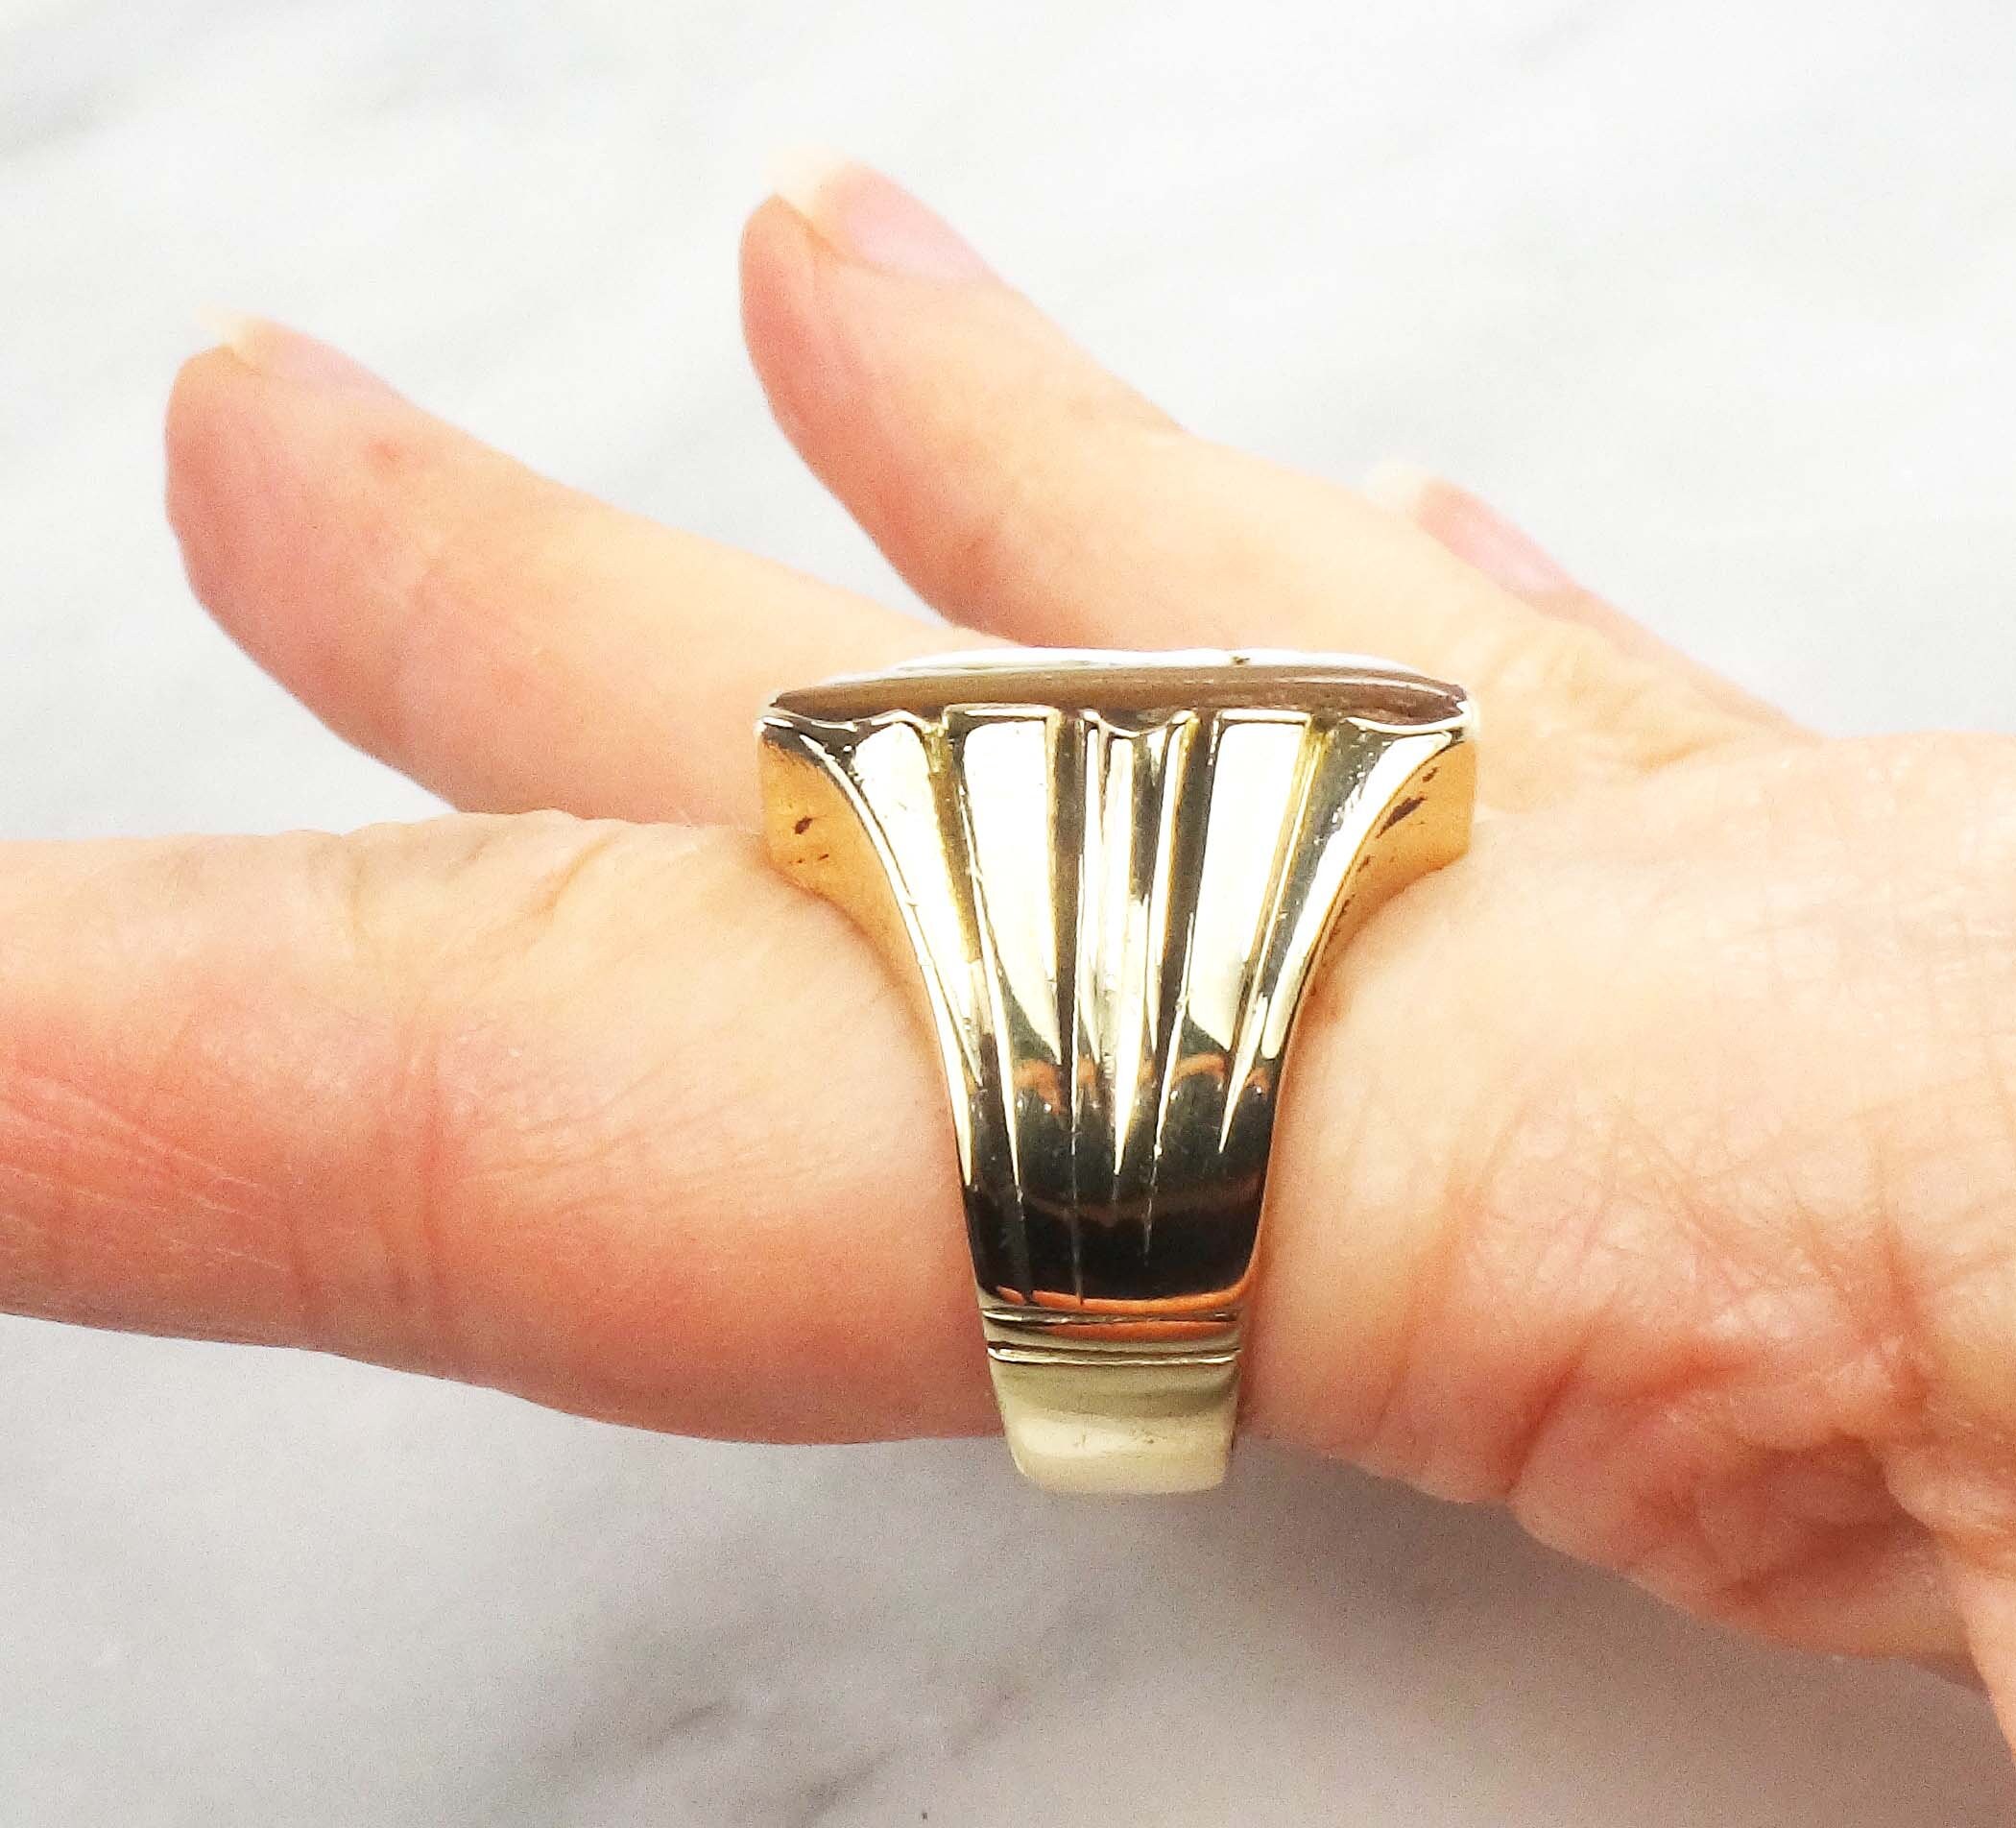 Sold at Auction: GENTS CARVED GOLD MONOGRAM RING WITH DIAMOND